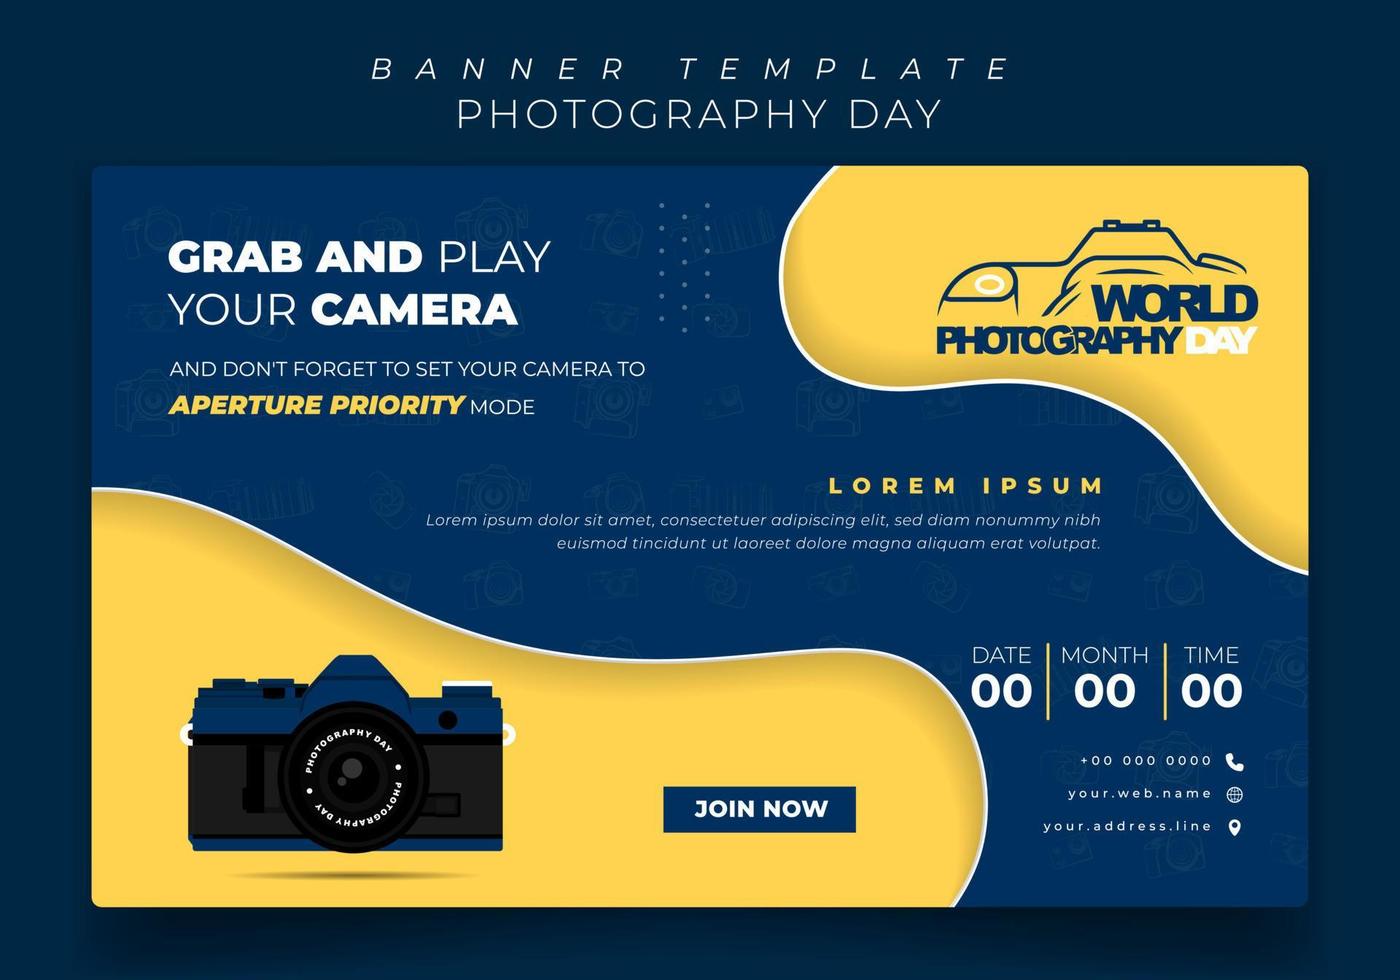 Banner template in blue and yellow background for photography day campaign design vector